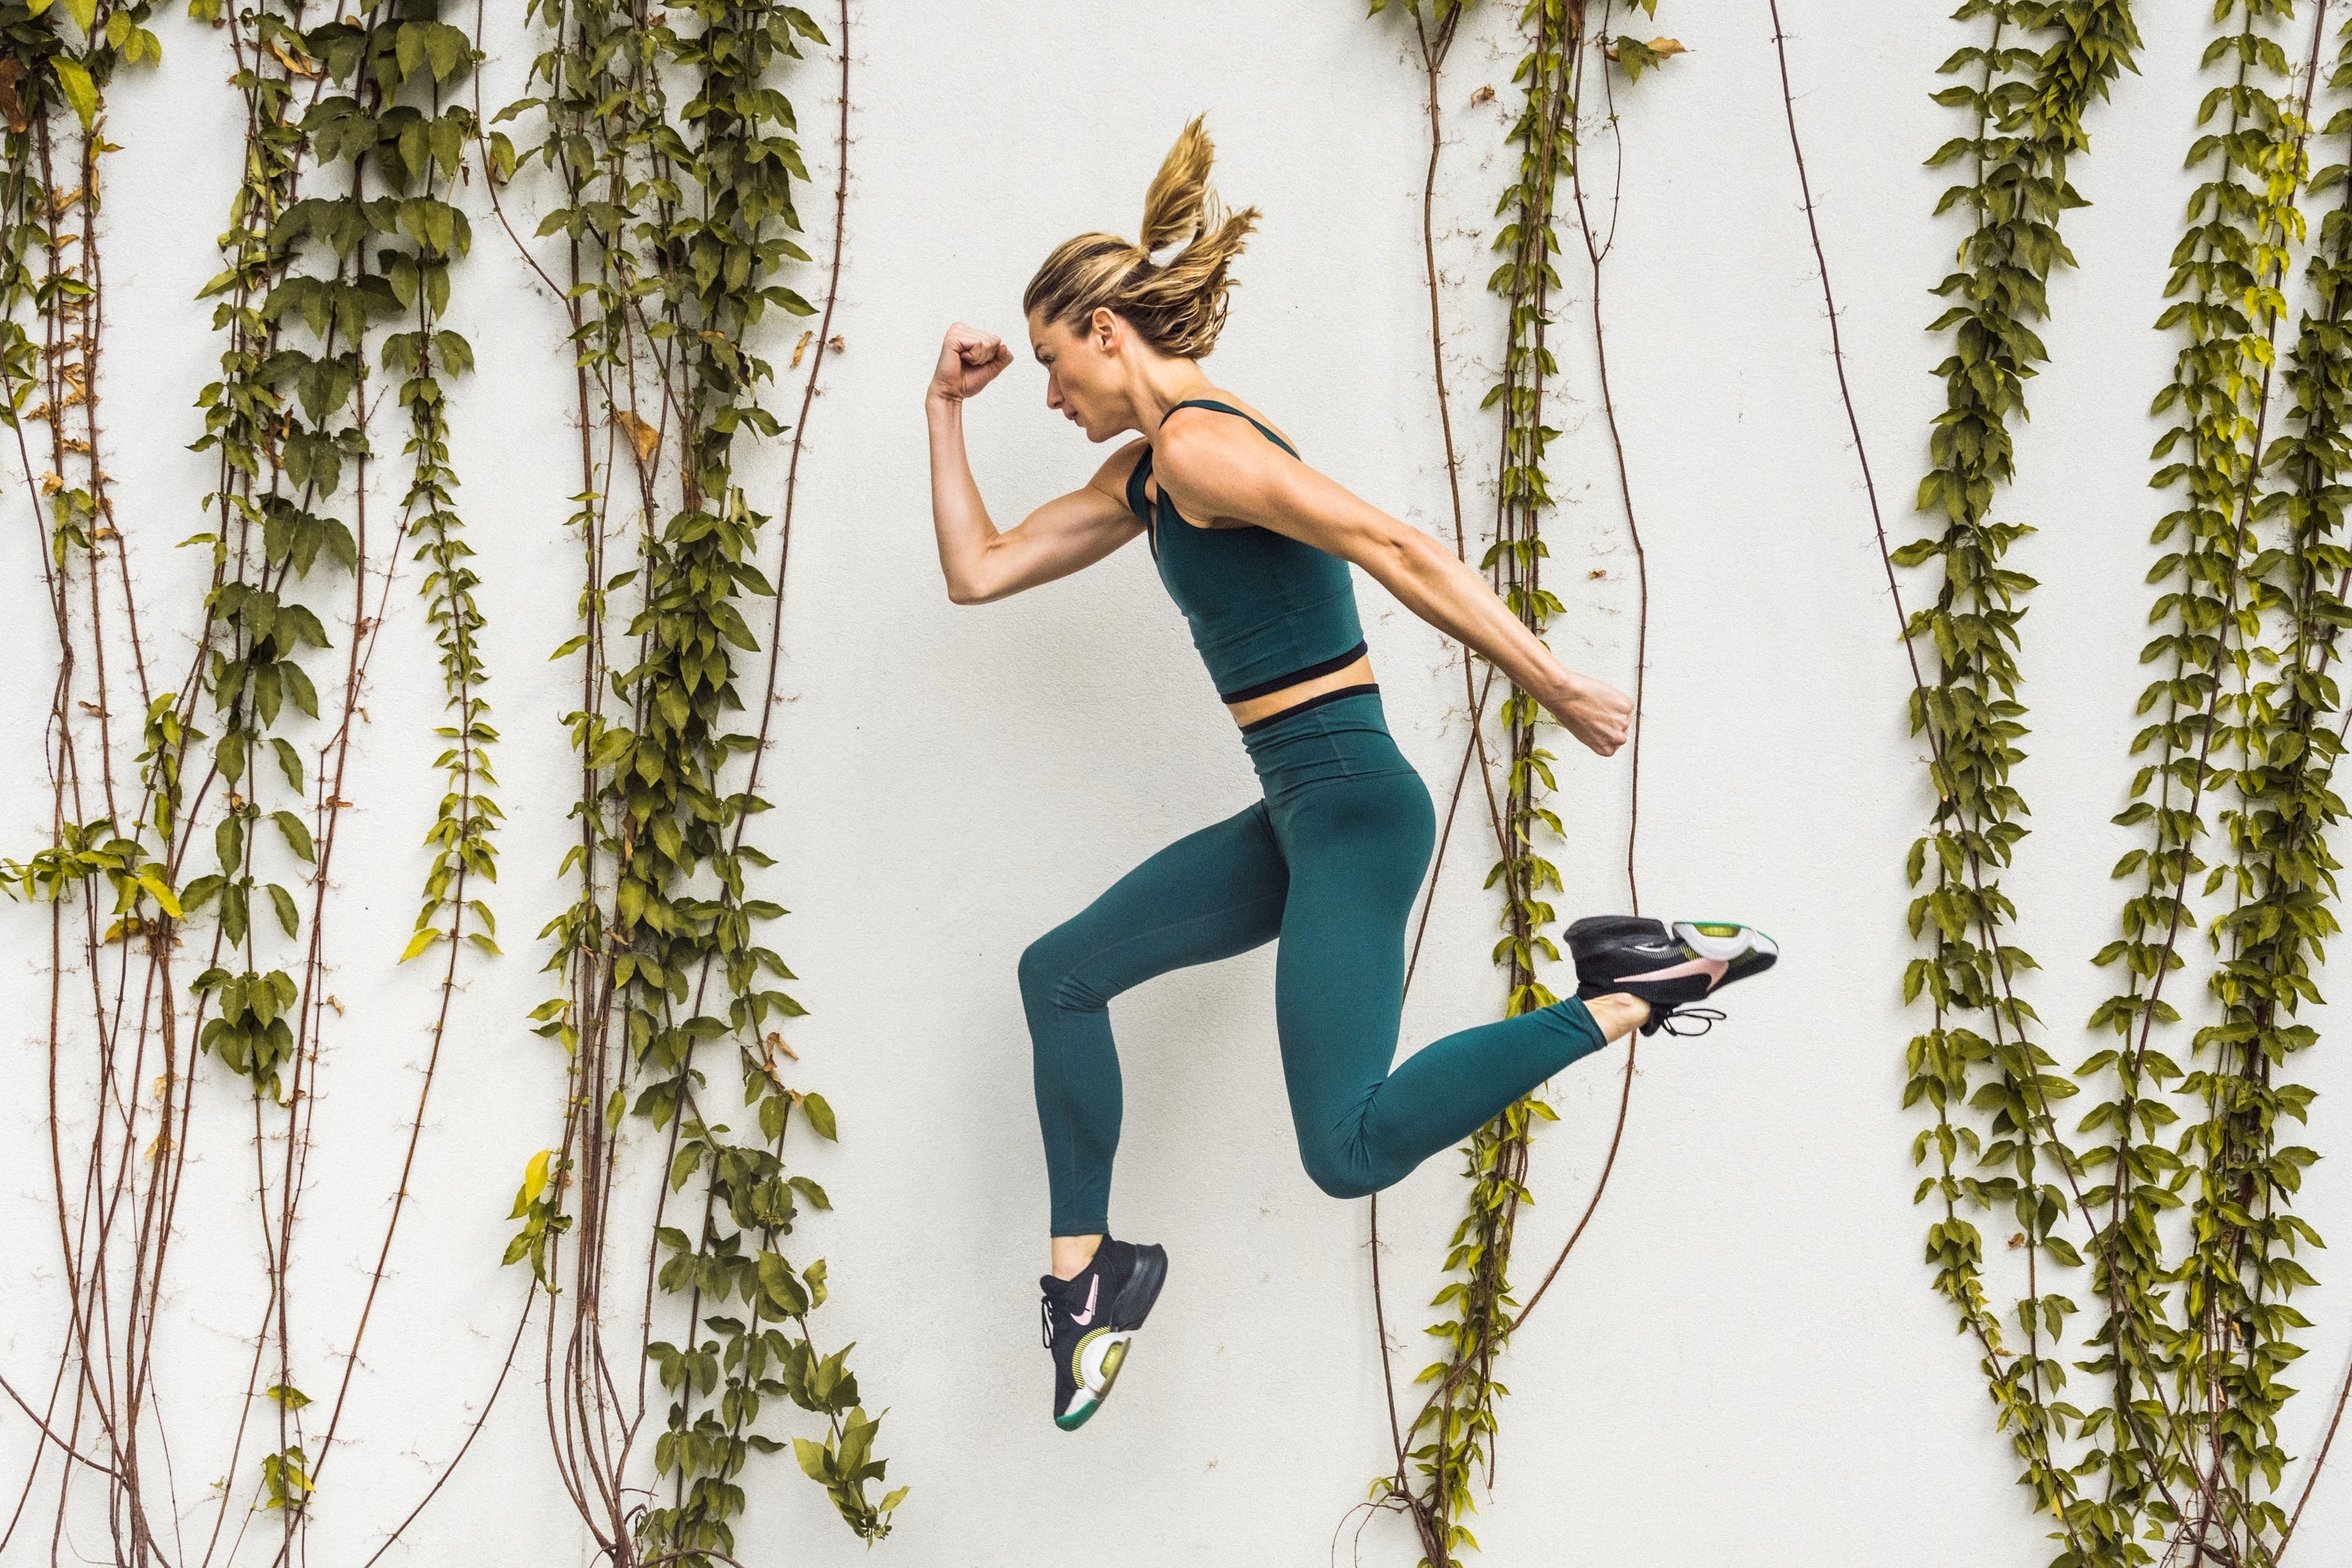 Women leaping through air in strong pose wearing green leggings and bra top and sneakers. Background is white wall with green ivy.